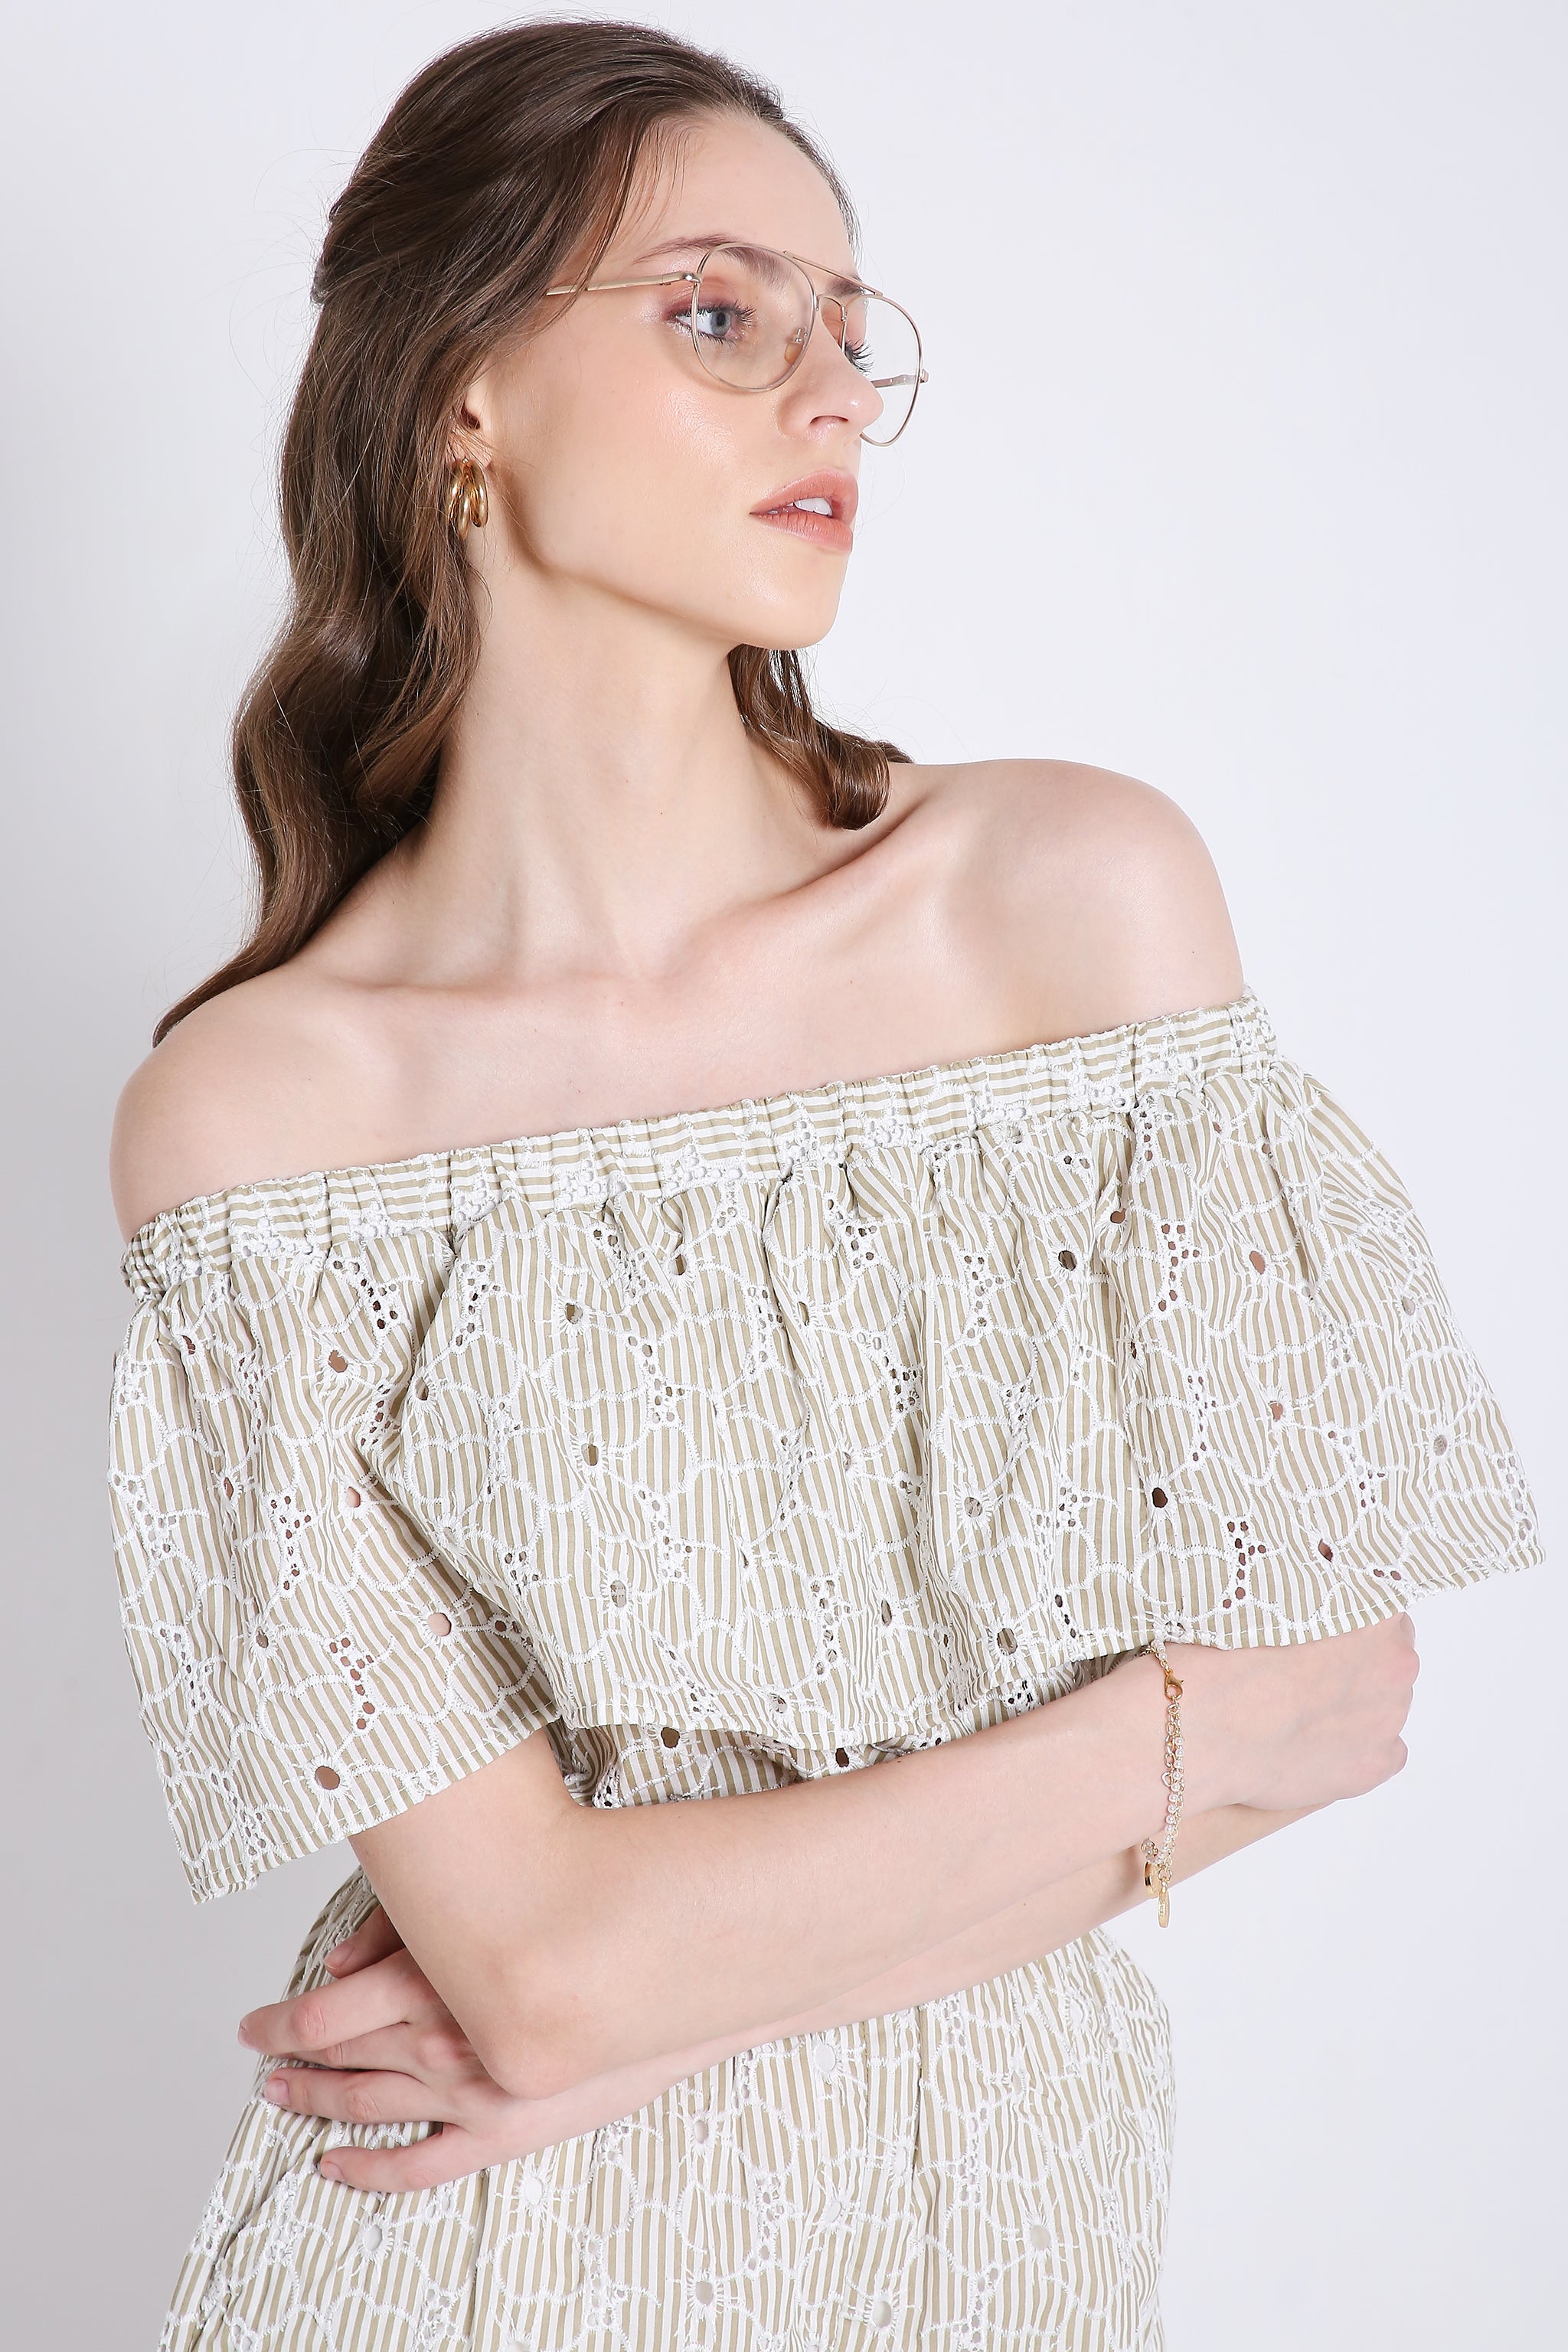 Off-Shoulder Playsuit with Stripes & Schiffli Embroidery Detail